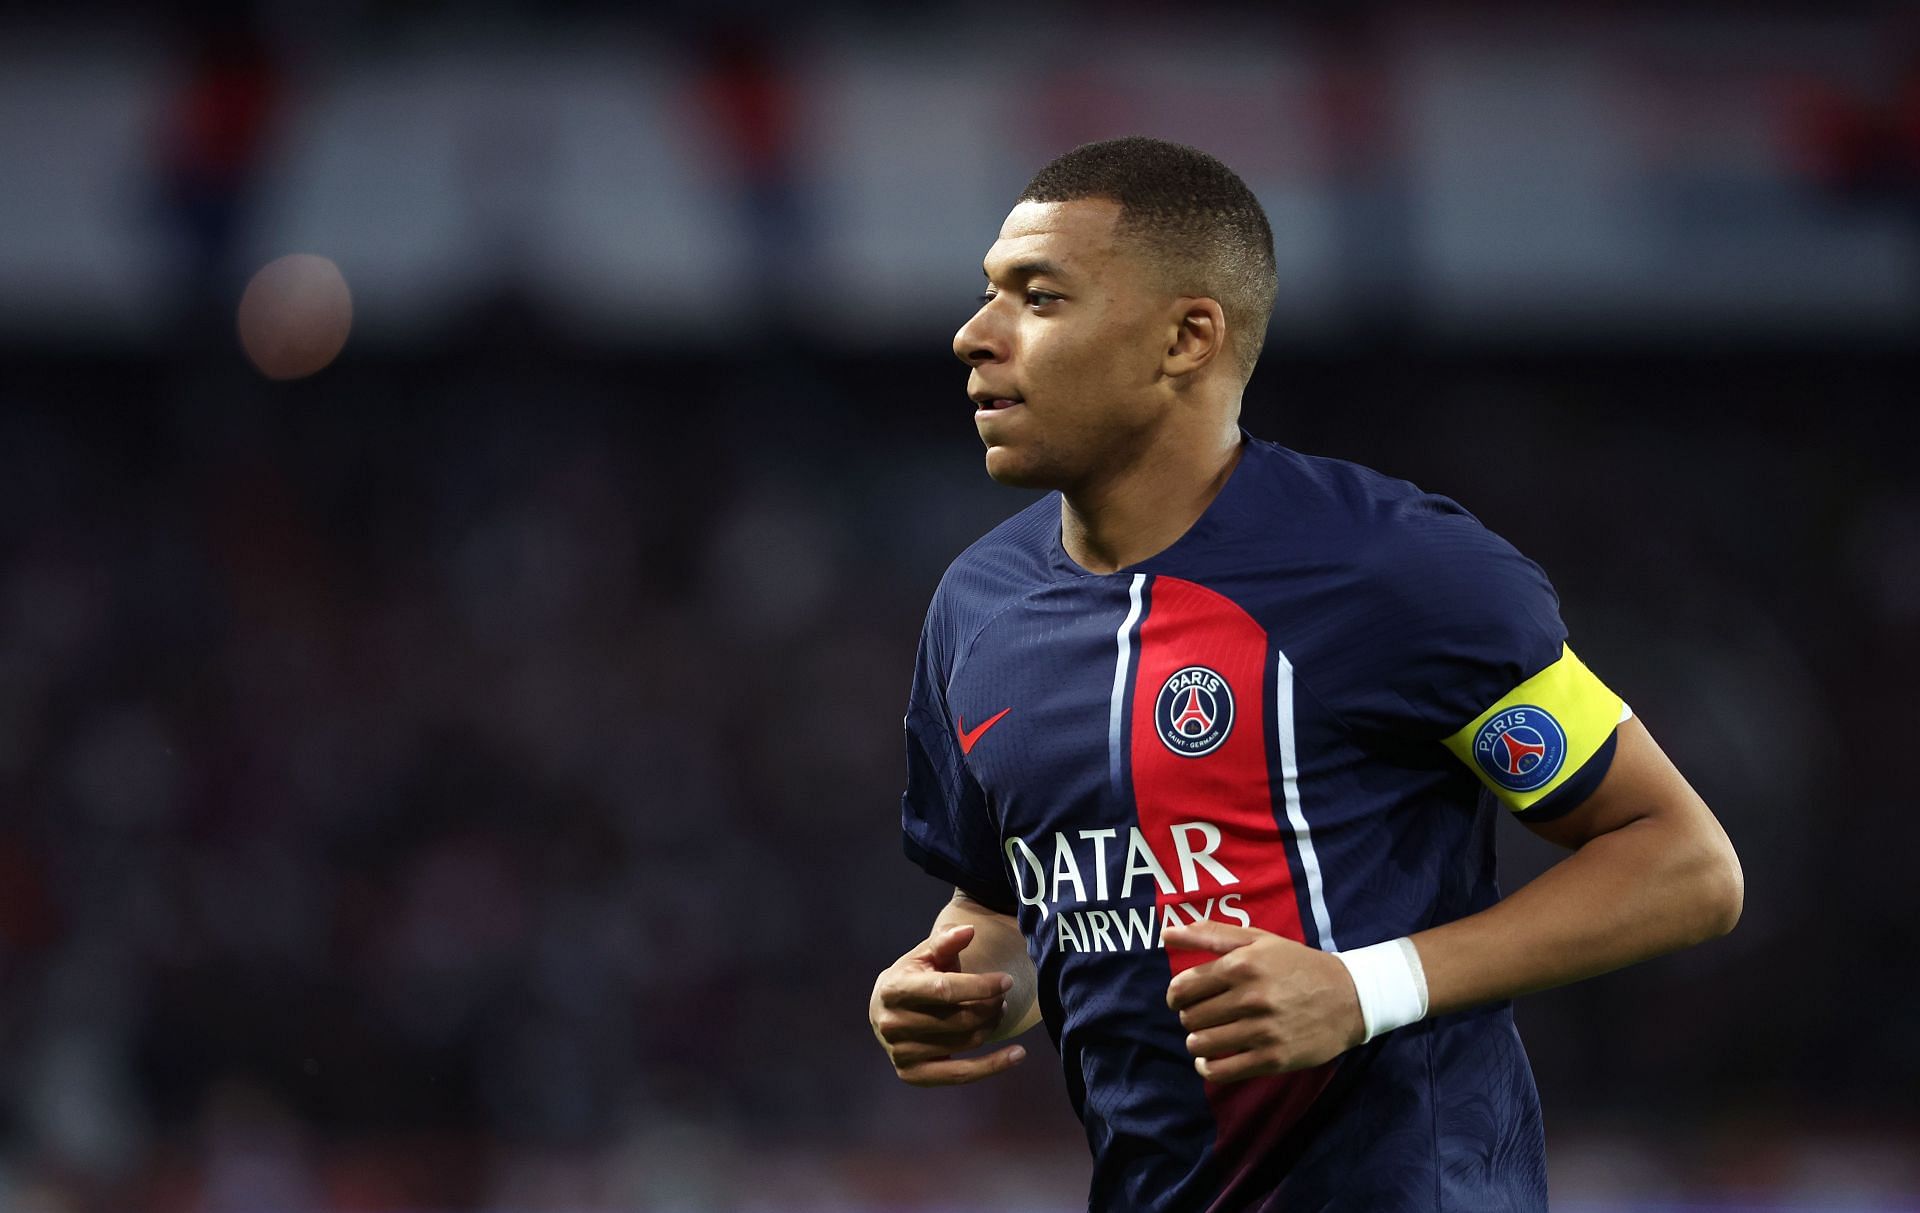 The Frenchman is set to leave PSG this window.